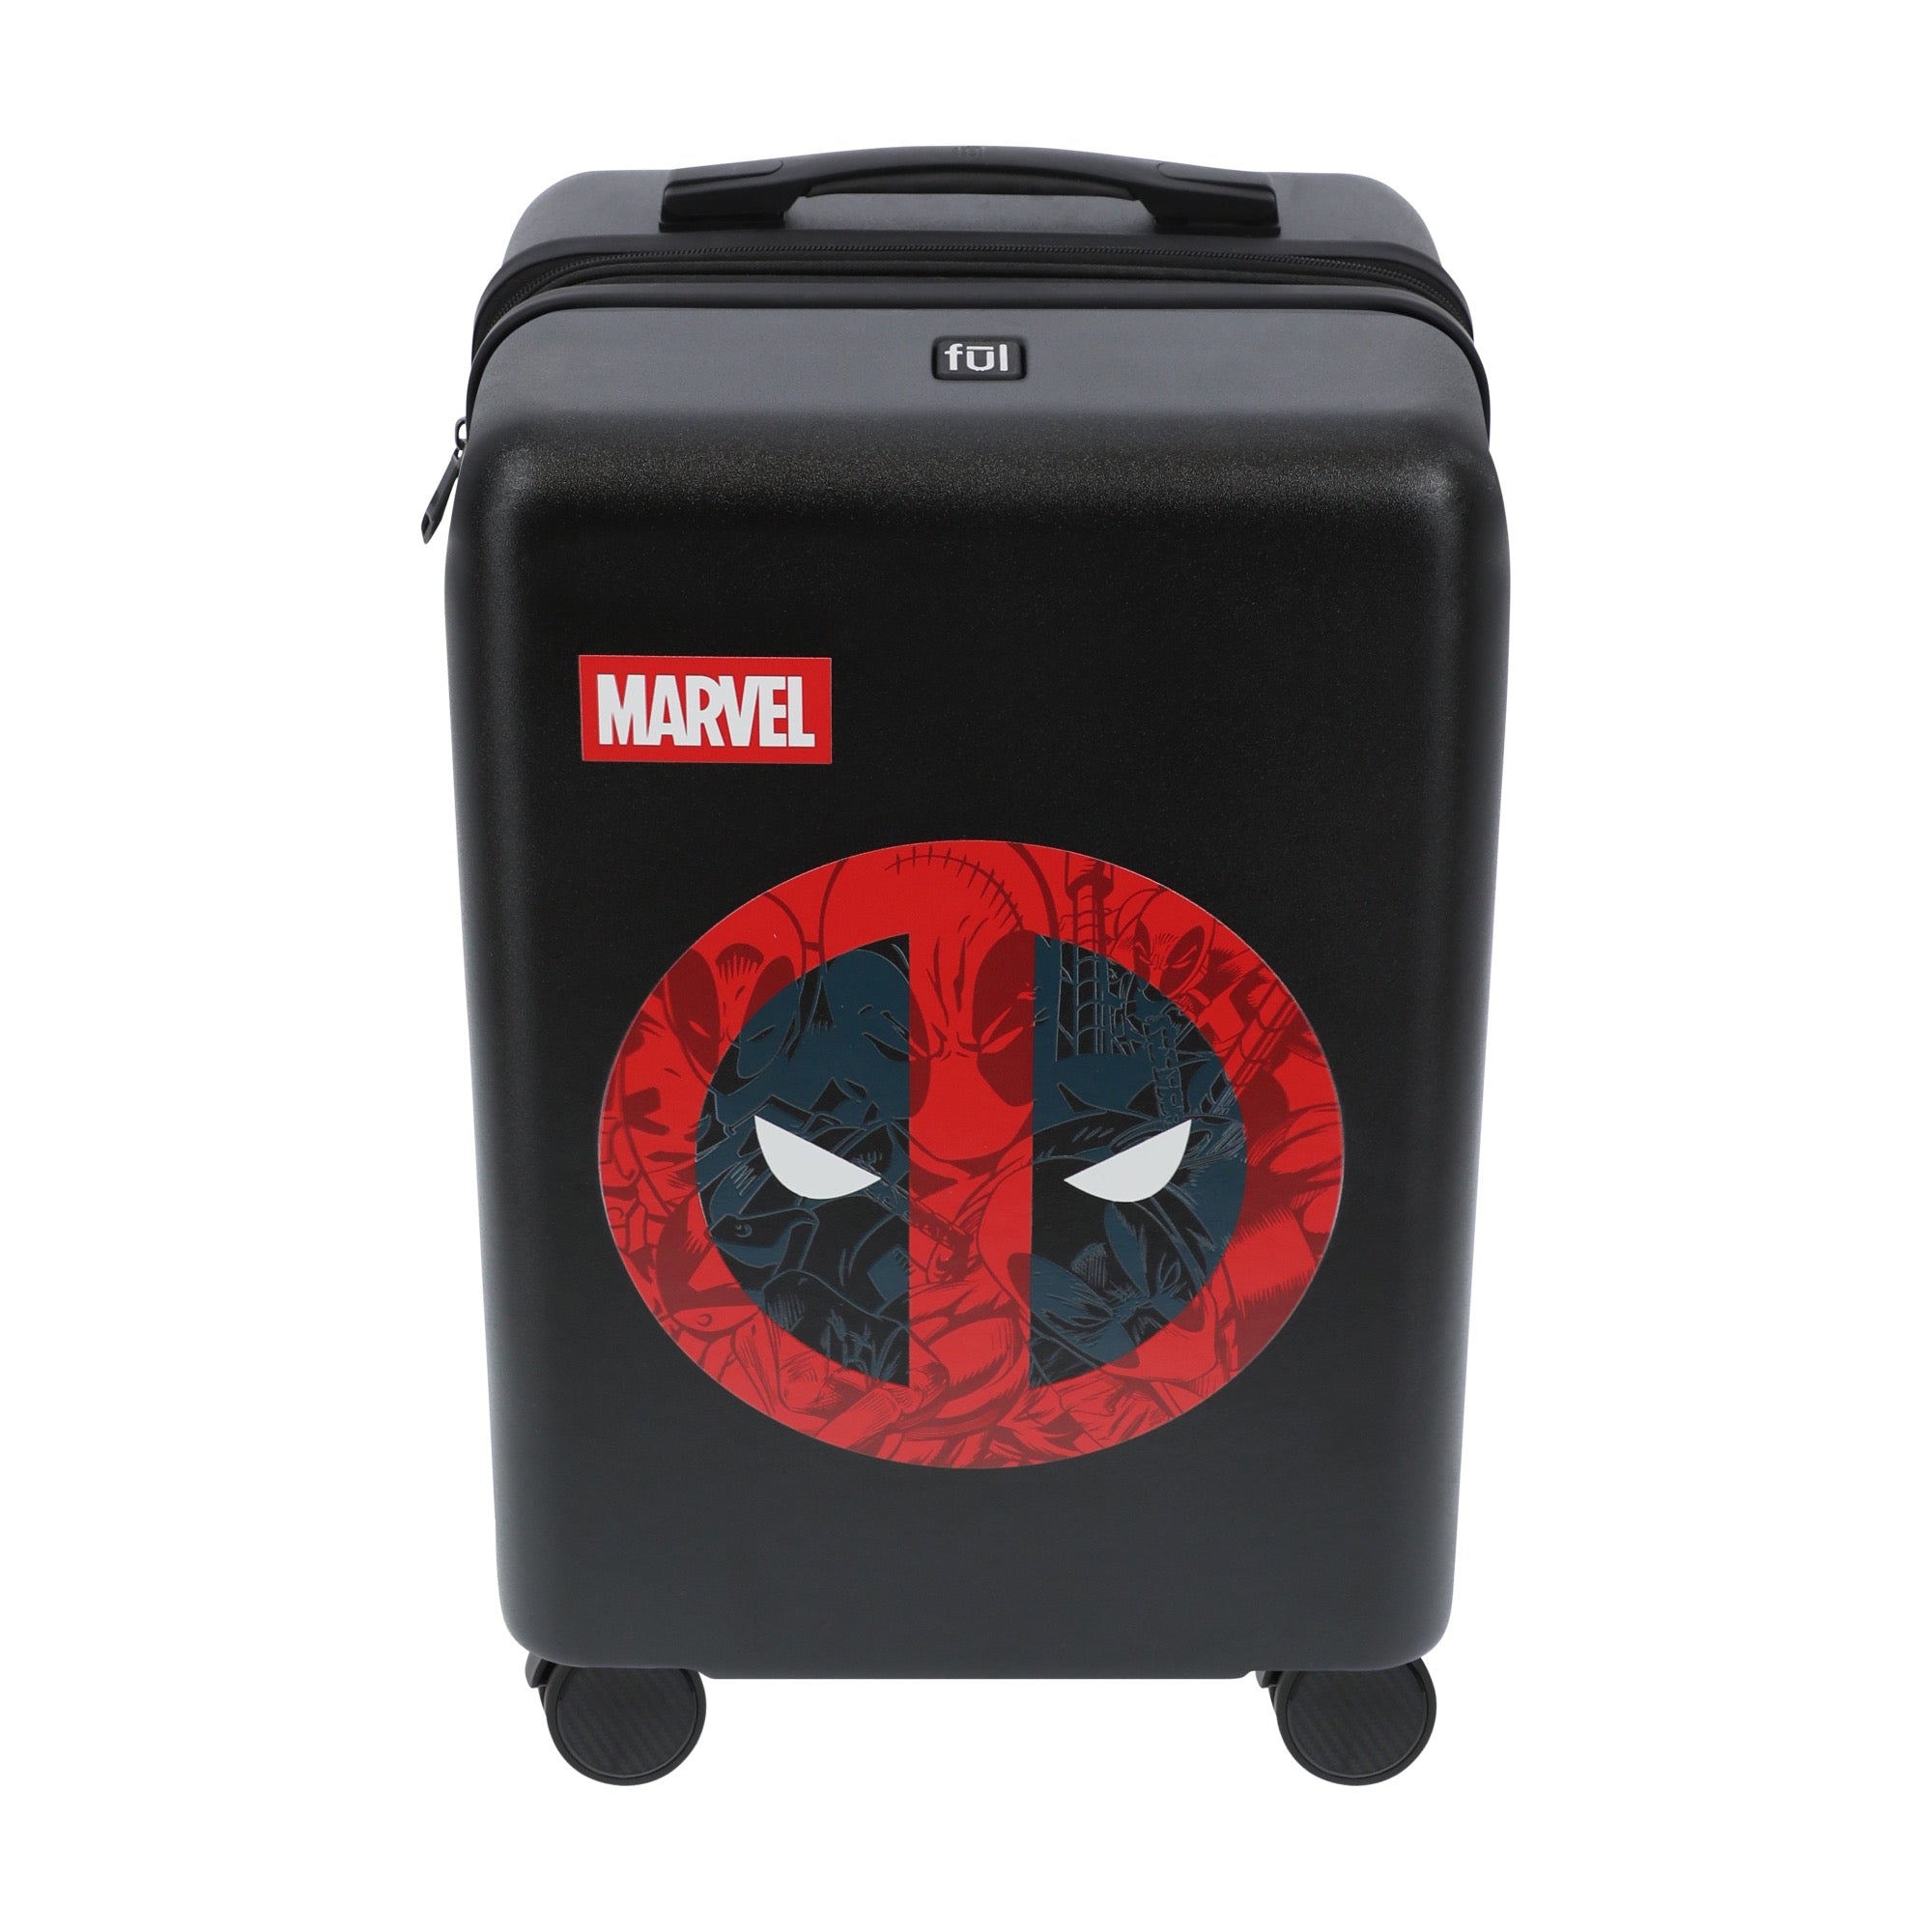 Black marvel deadpool 22.5" carry-on spinner suitcase luggage by Ful